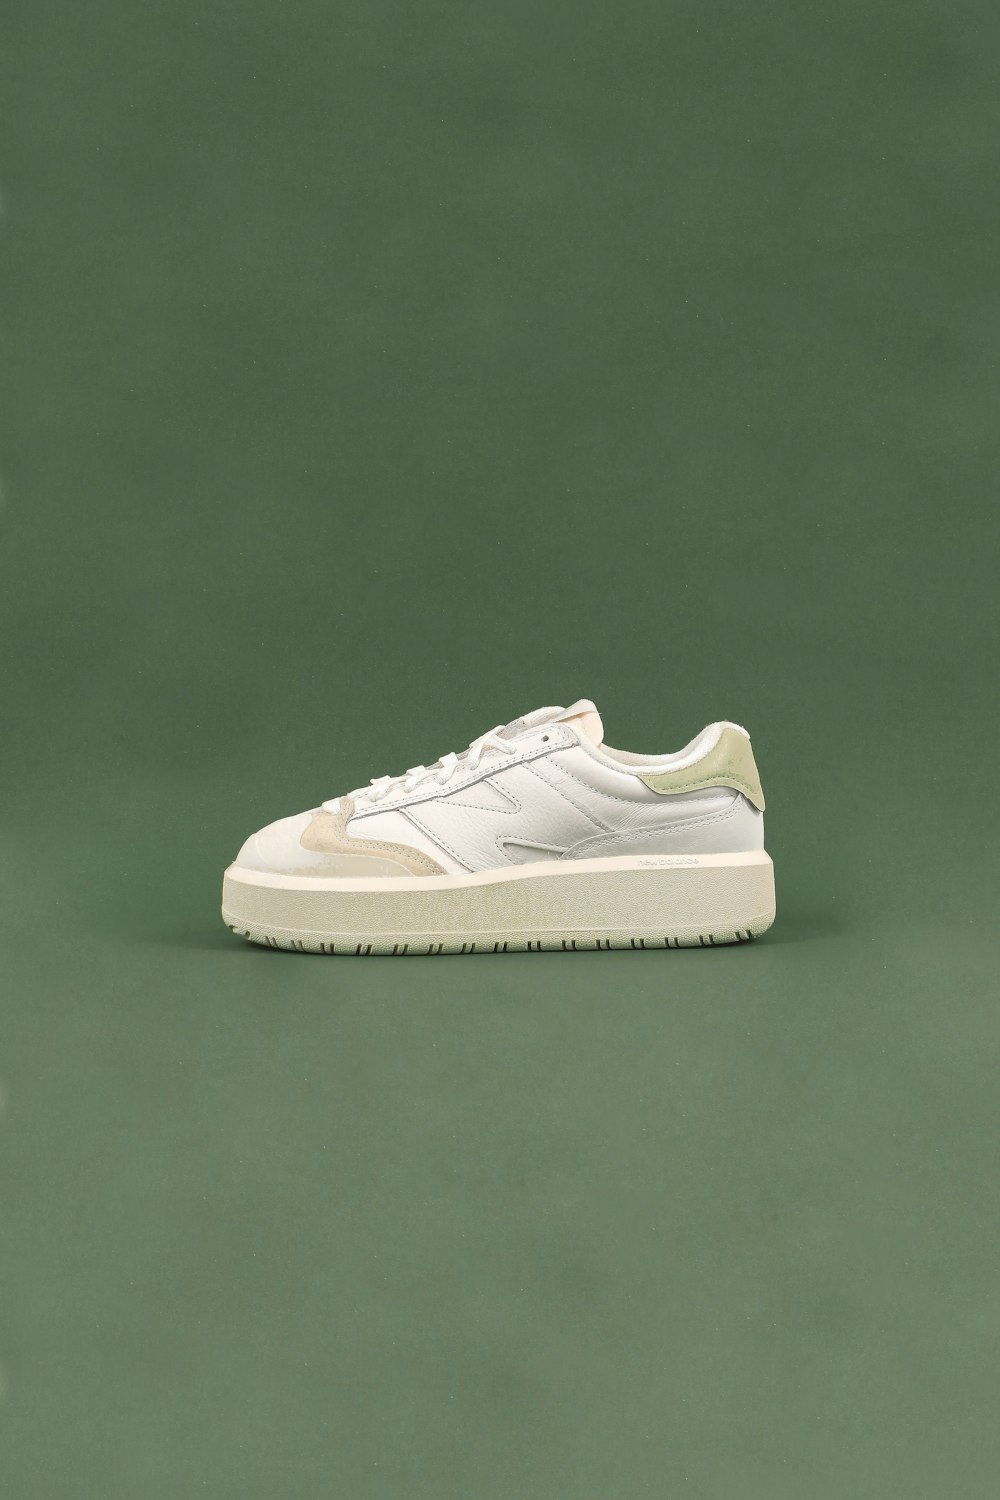 a white tennis shoe on a green surface